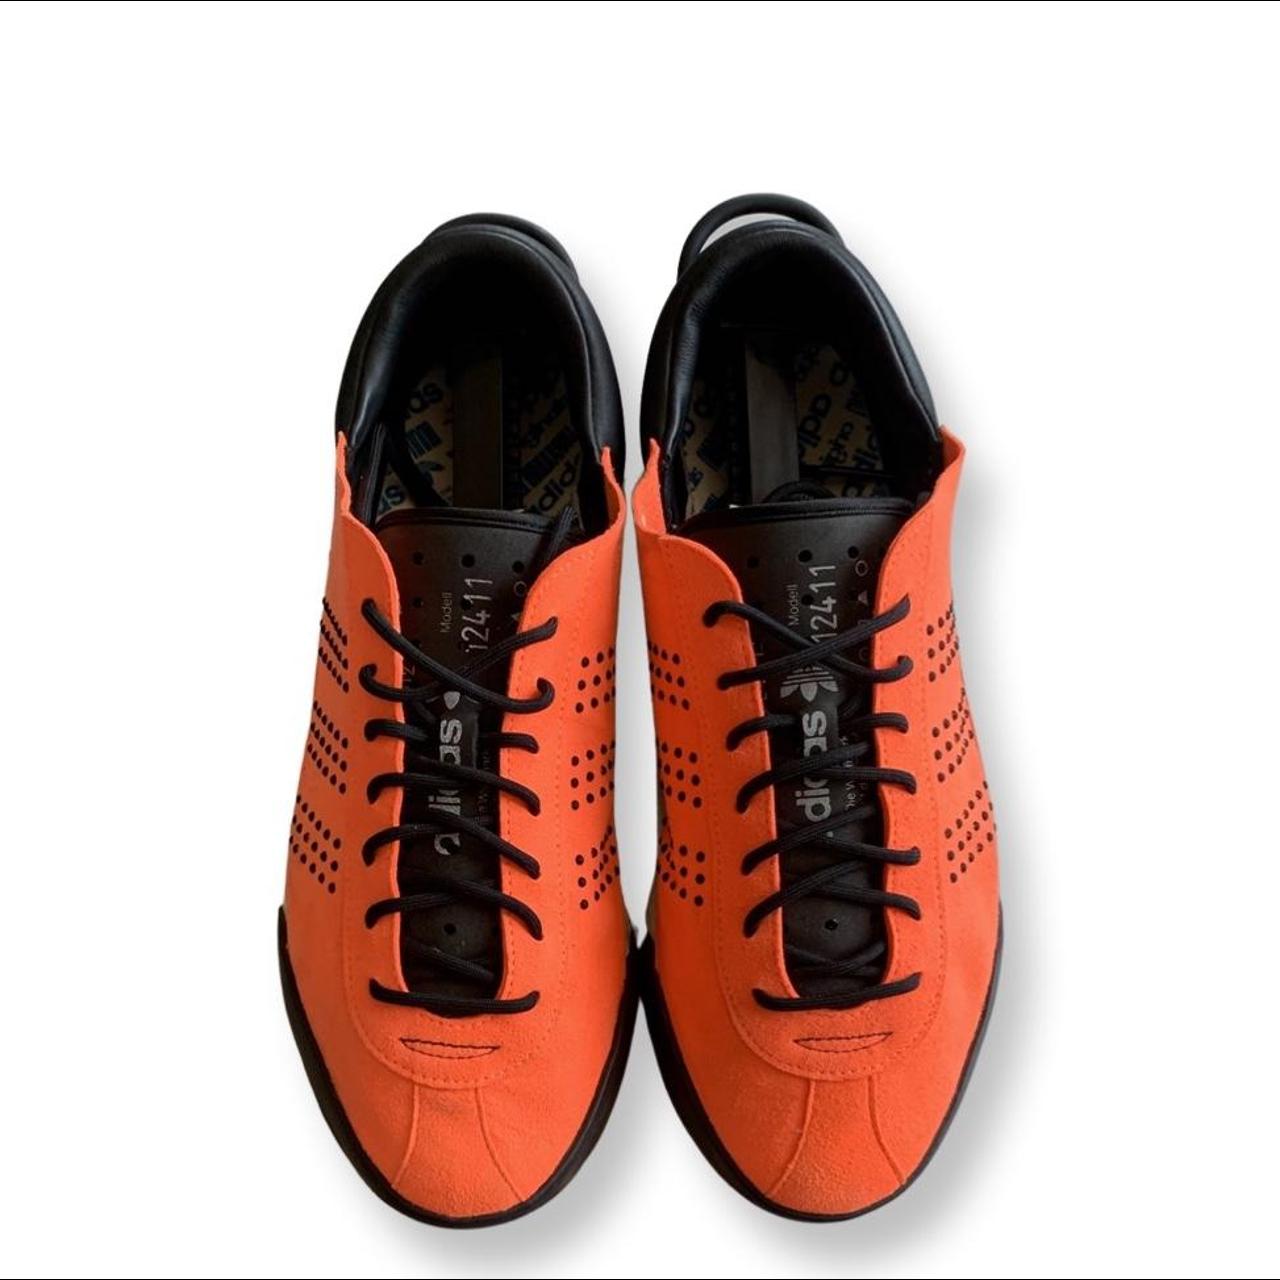 Alexander Wang Men's Orange and Red Trainers (2)